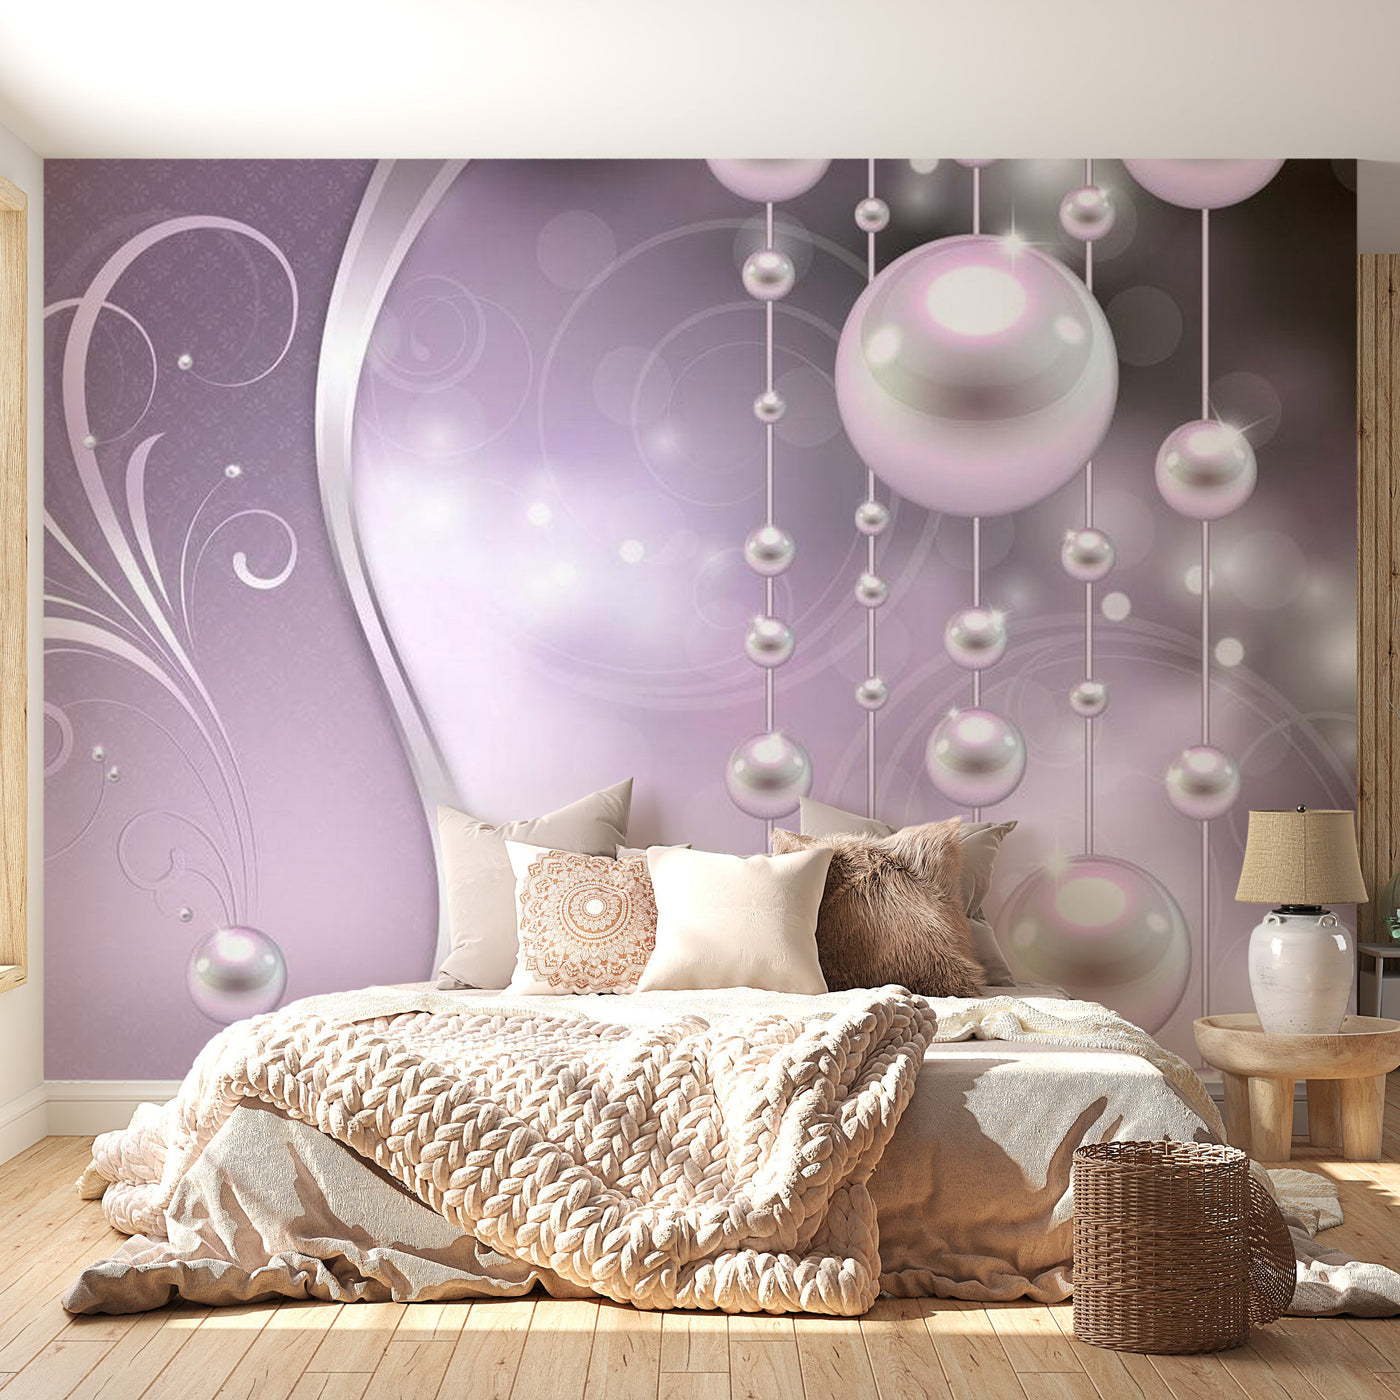 Peel & Stick Glam Wall Mural - Pearls In Lilac - Removable Wall Decals